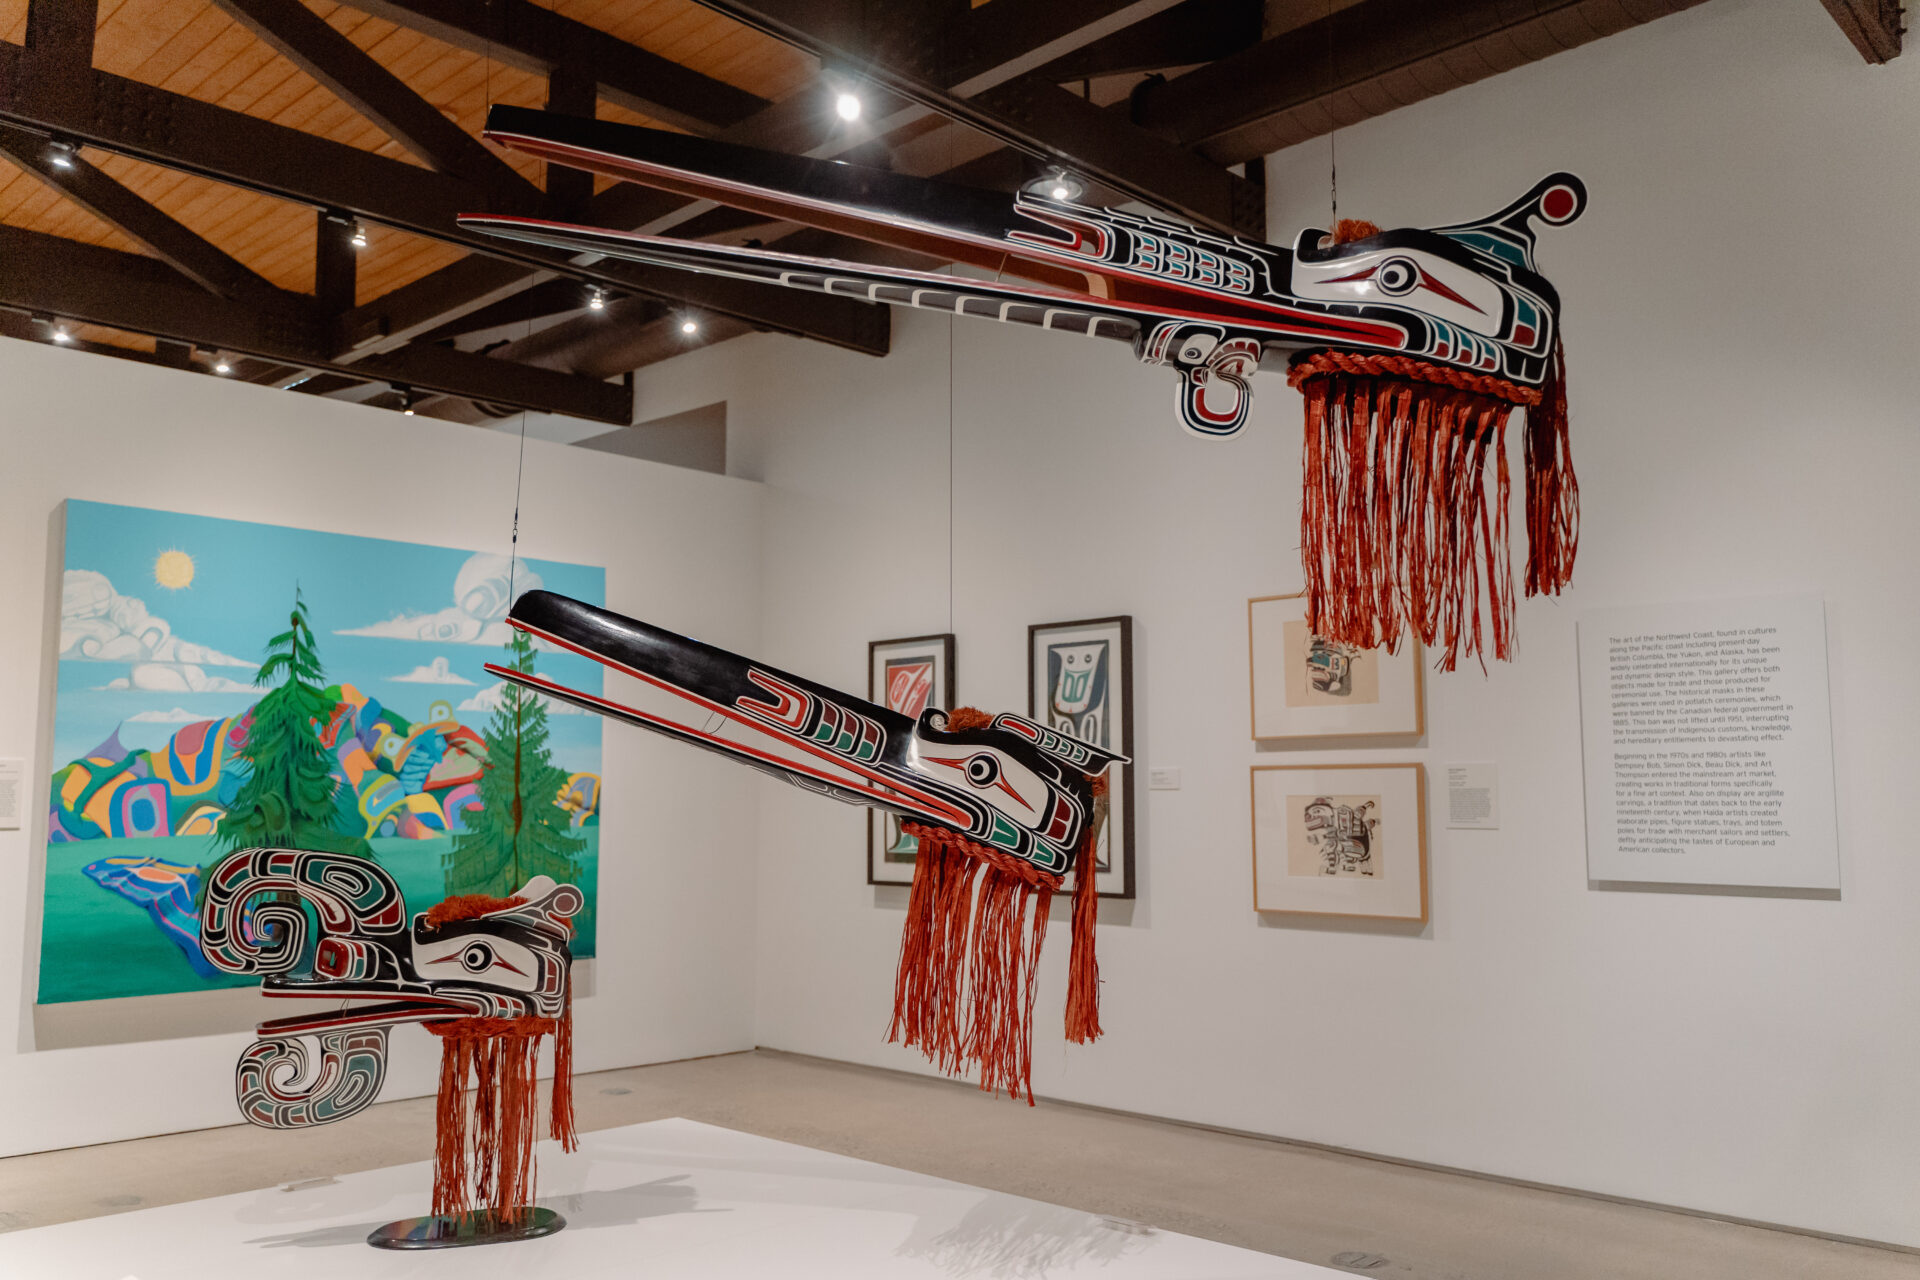 A display of Canadian Native art in a gallery.